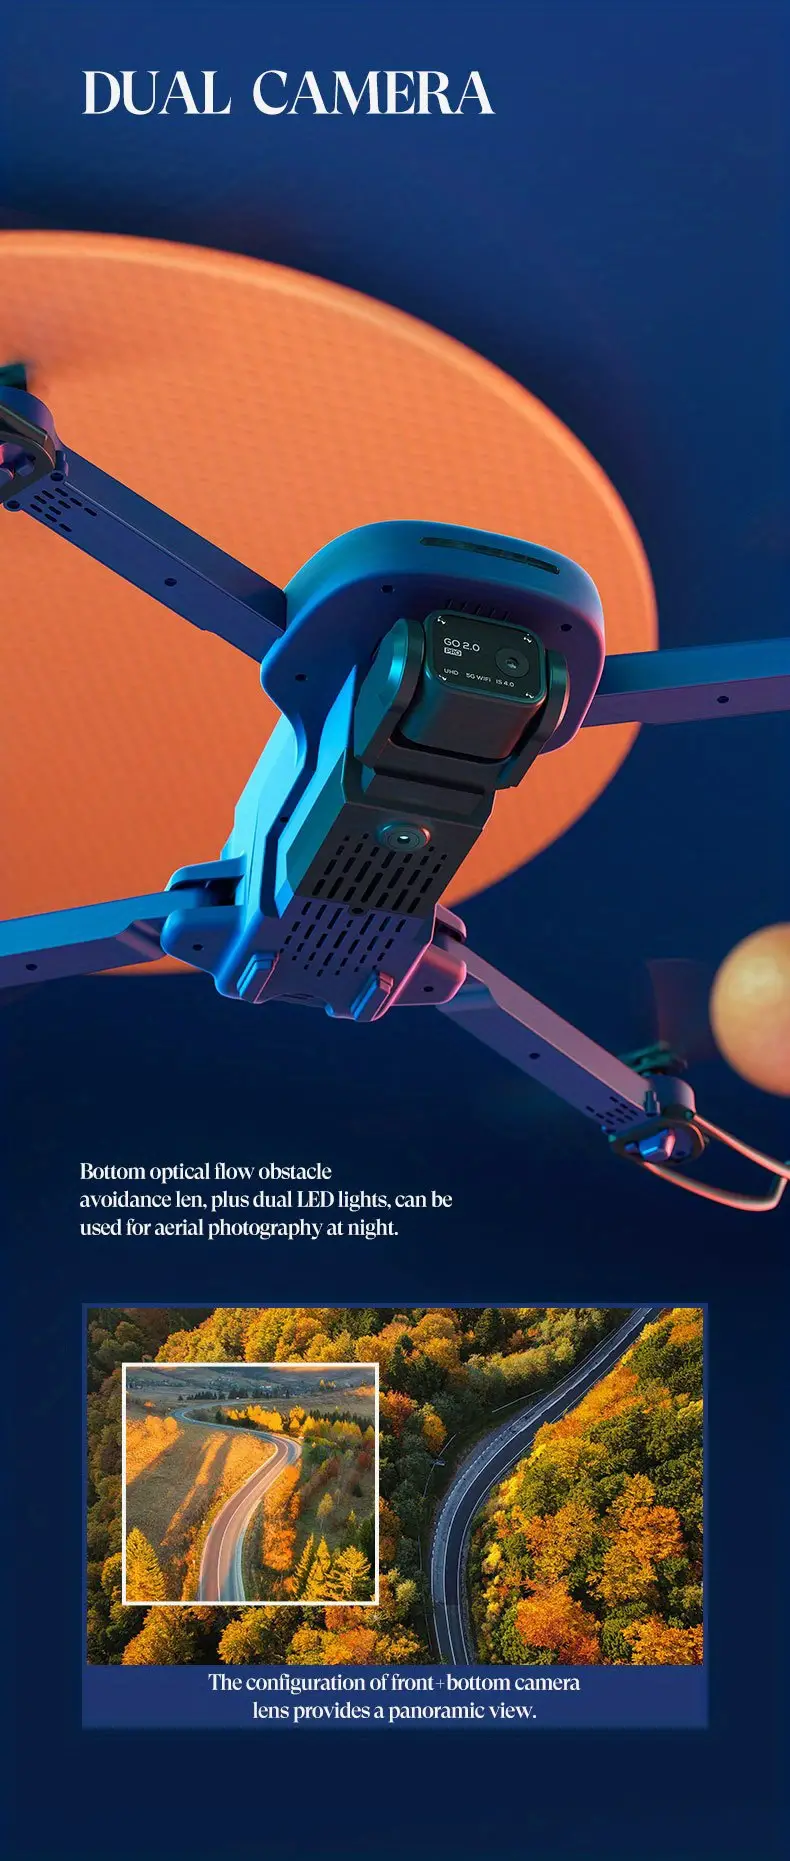 drone with obstacle avoidance eic camera headless mode optical flow positioning one key return smart follow headless mode 5g real time image transmission gesture photography details 6